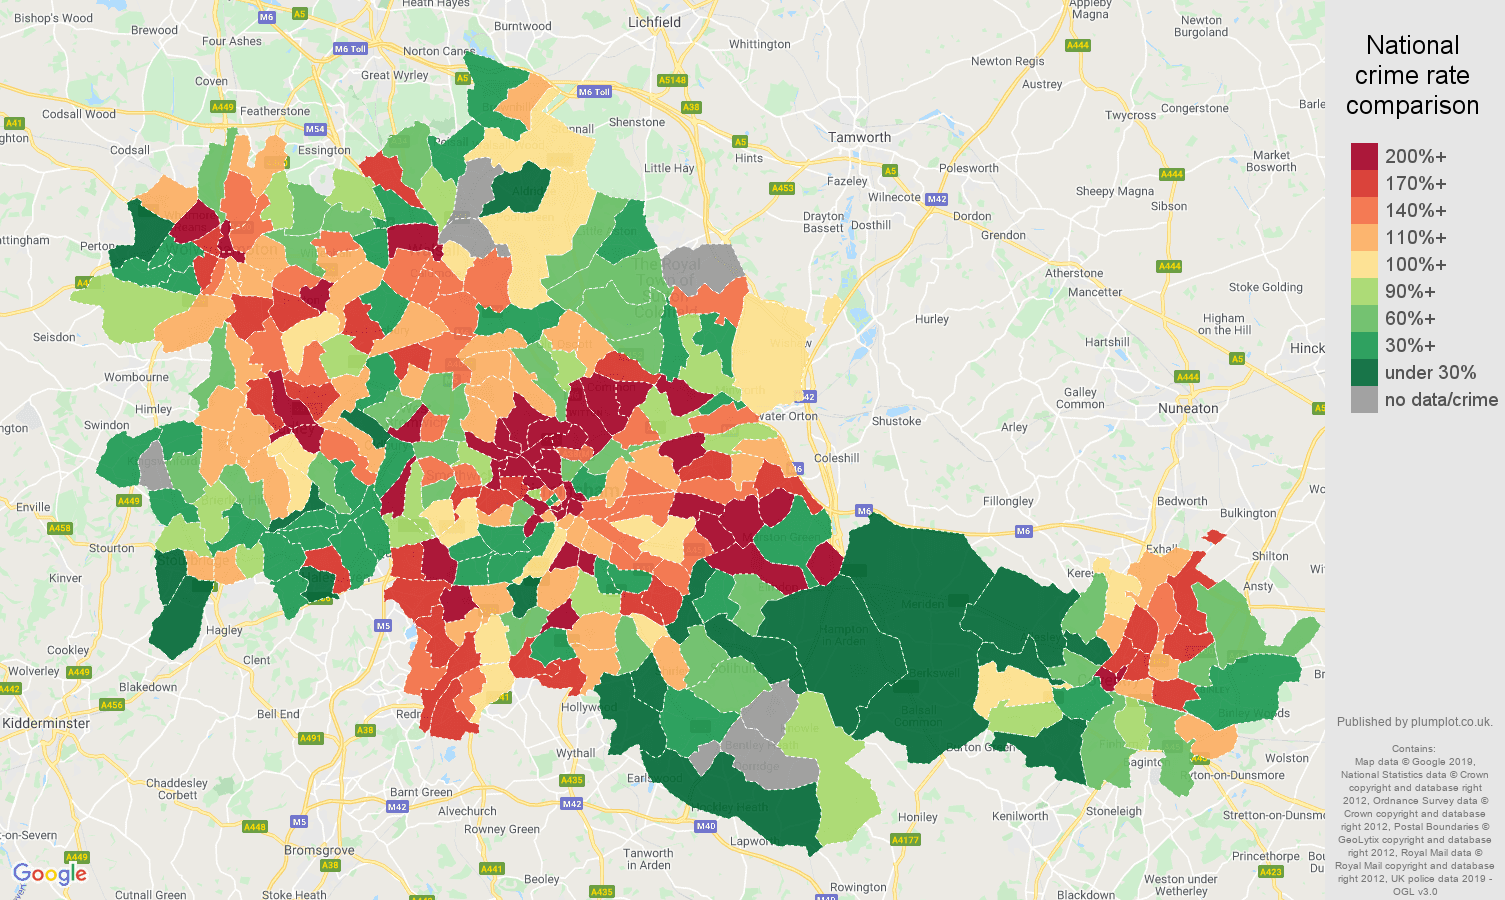 West Midlands county possession of weapons crime rate comparison map